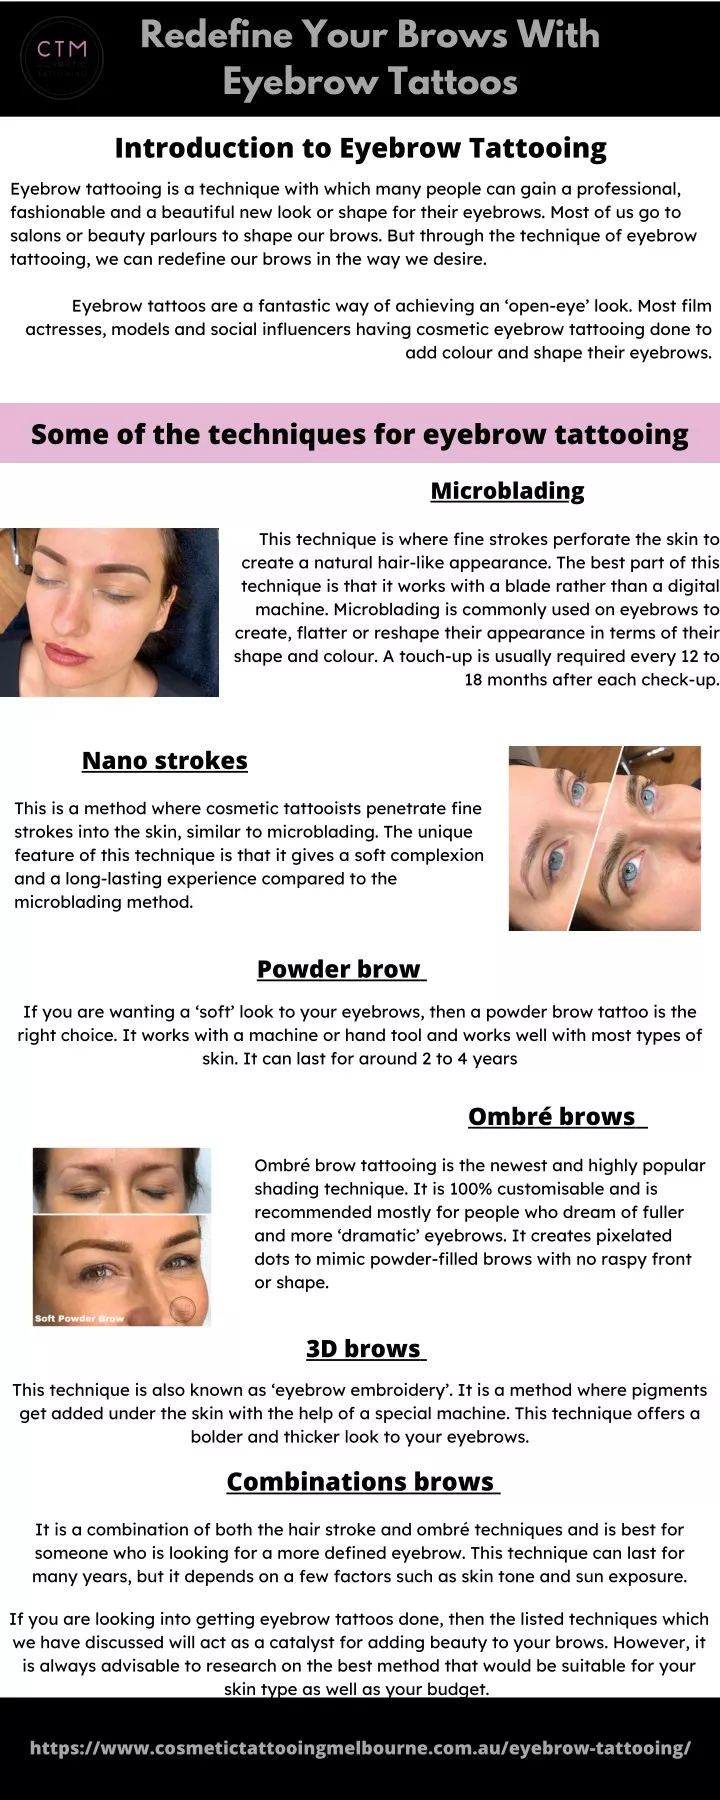 cosmetic tattooing melbourne redefine your brows